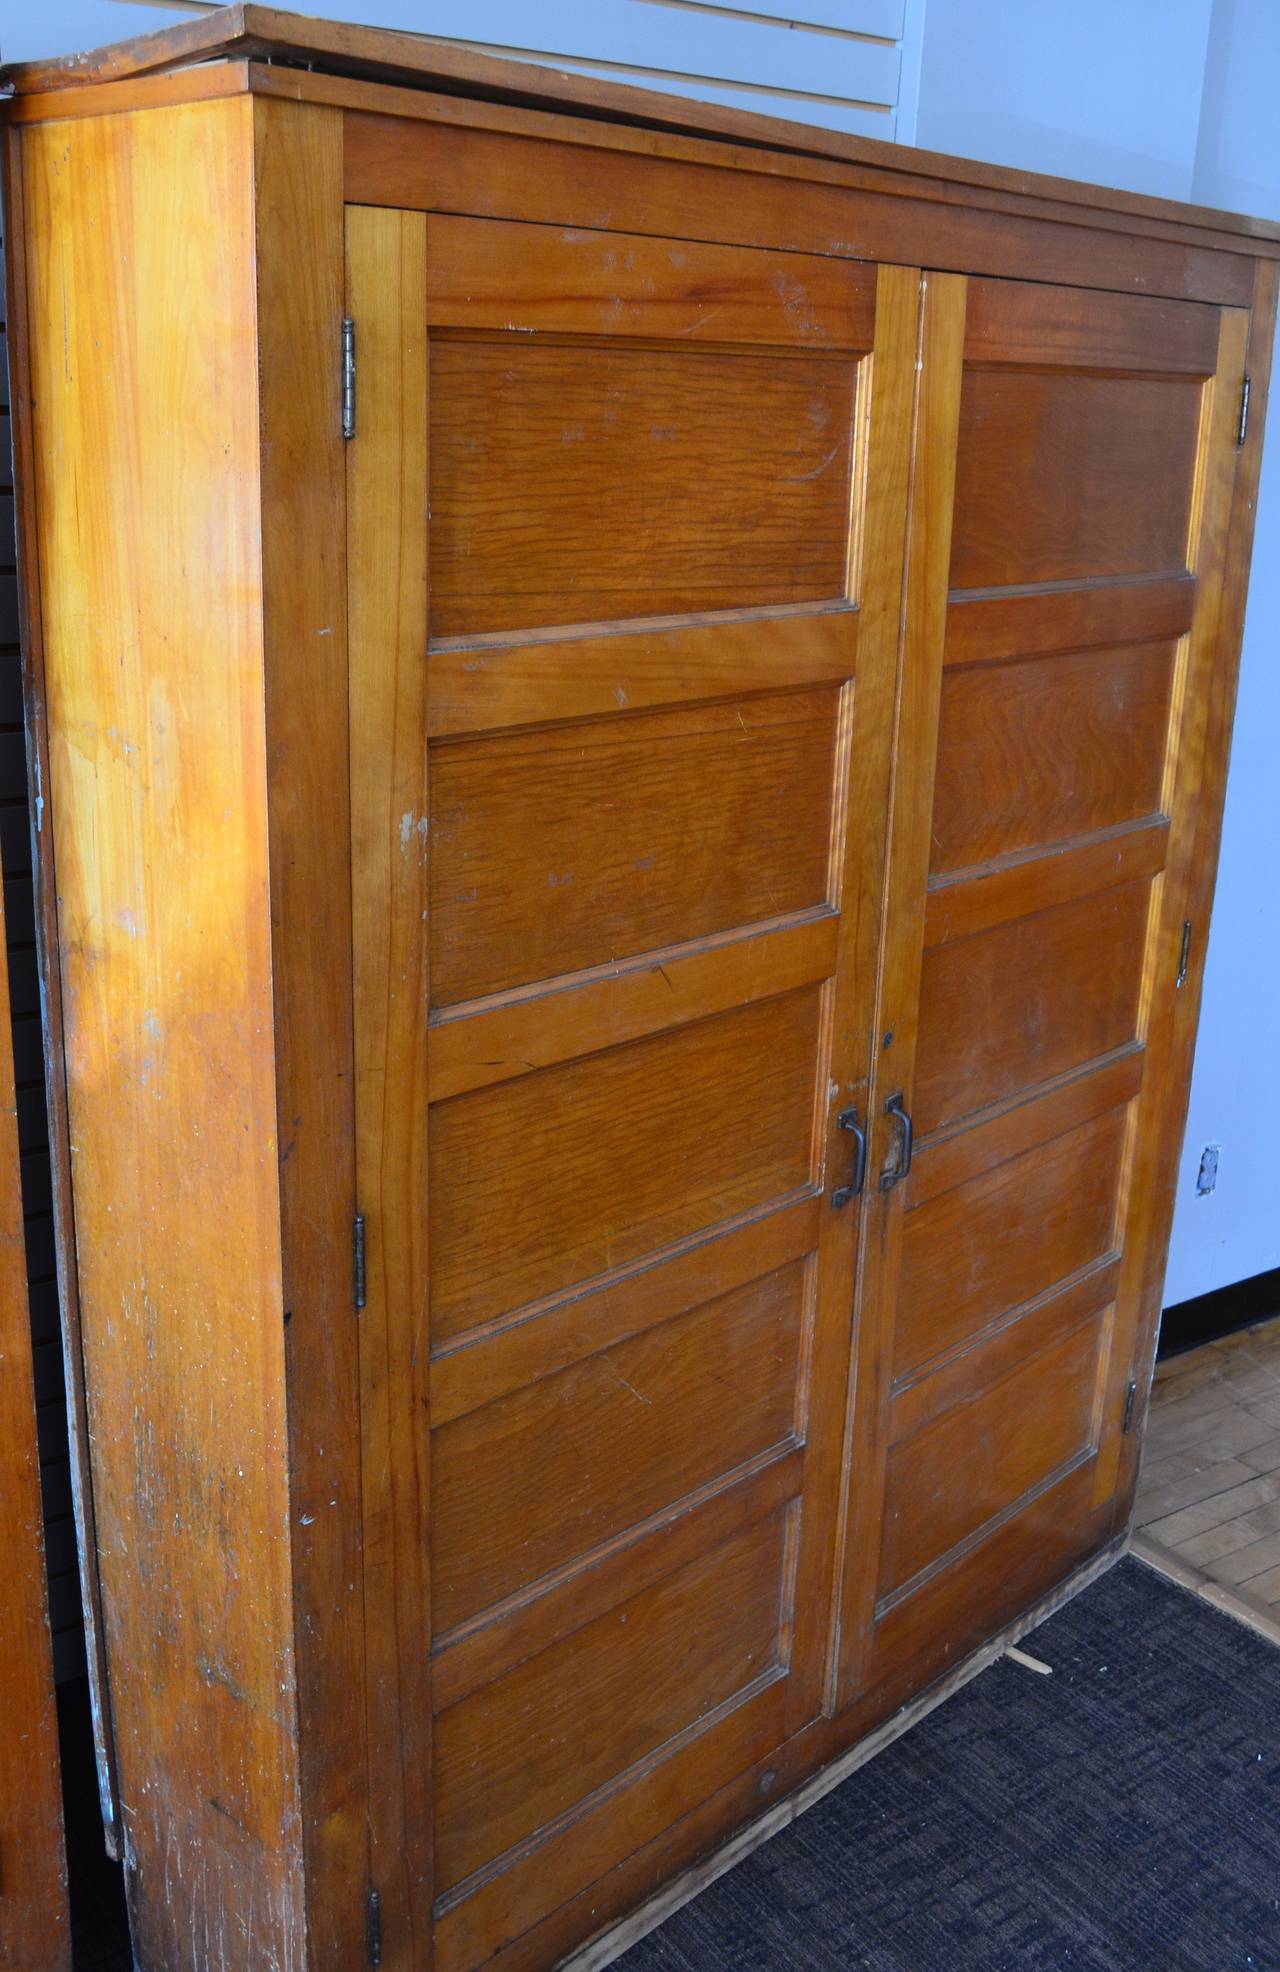 School house pine cabinet locker, circa 1920s. Adjustable shelves within, four shelf boards included. Matching pair available. Priced individually.